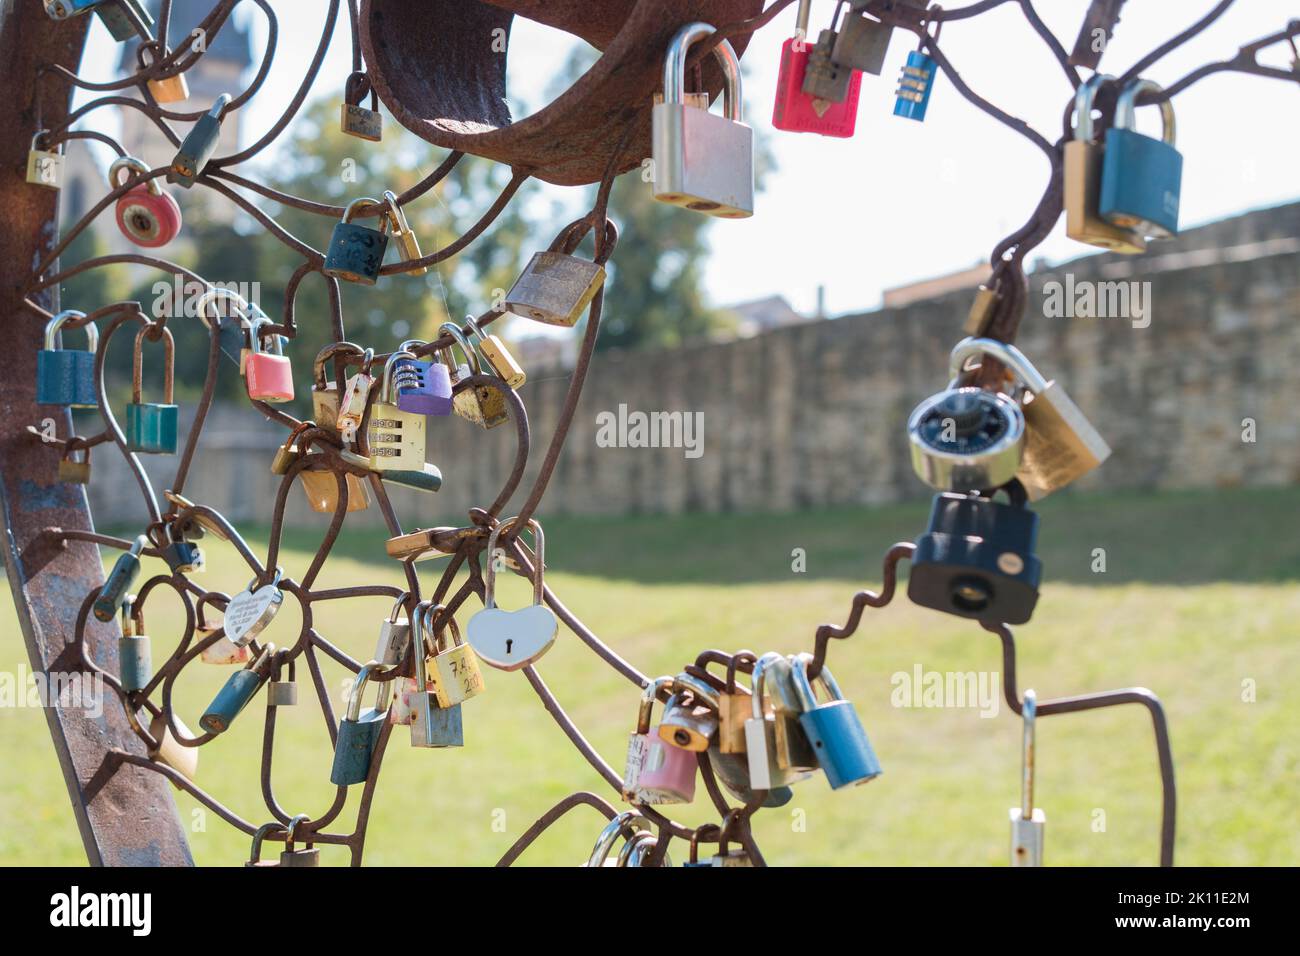 Lockers of love in Bardejov city, Slovakia. Near singing fountain is big metal heart where people can lock their love with lockers. Stock Photo